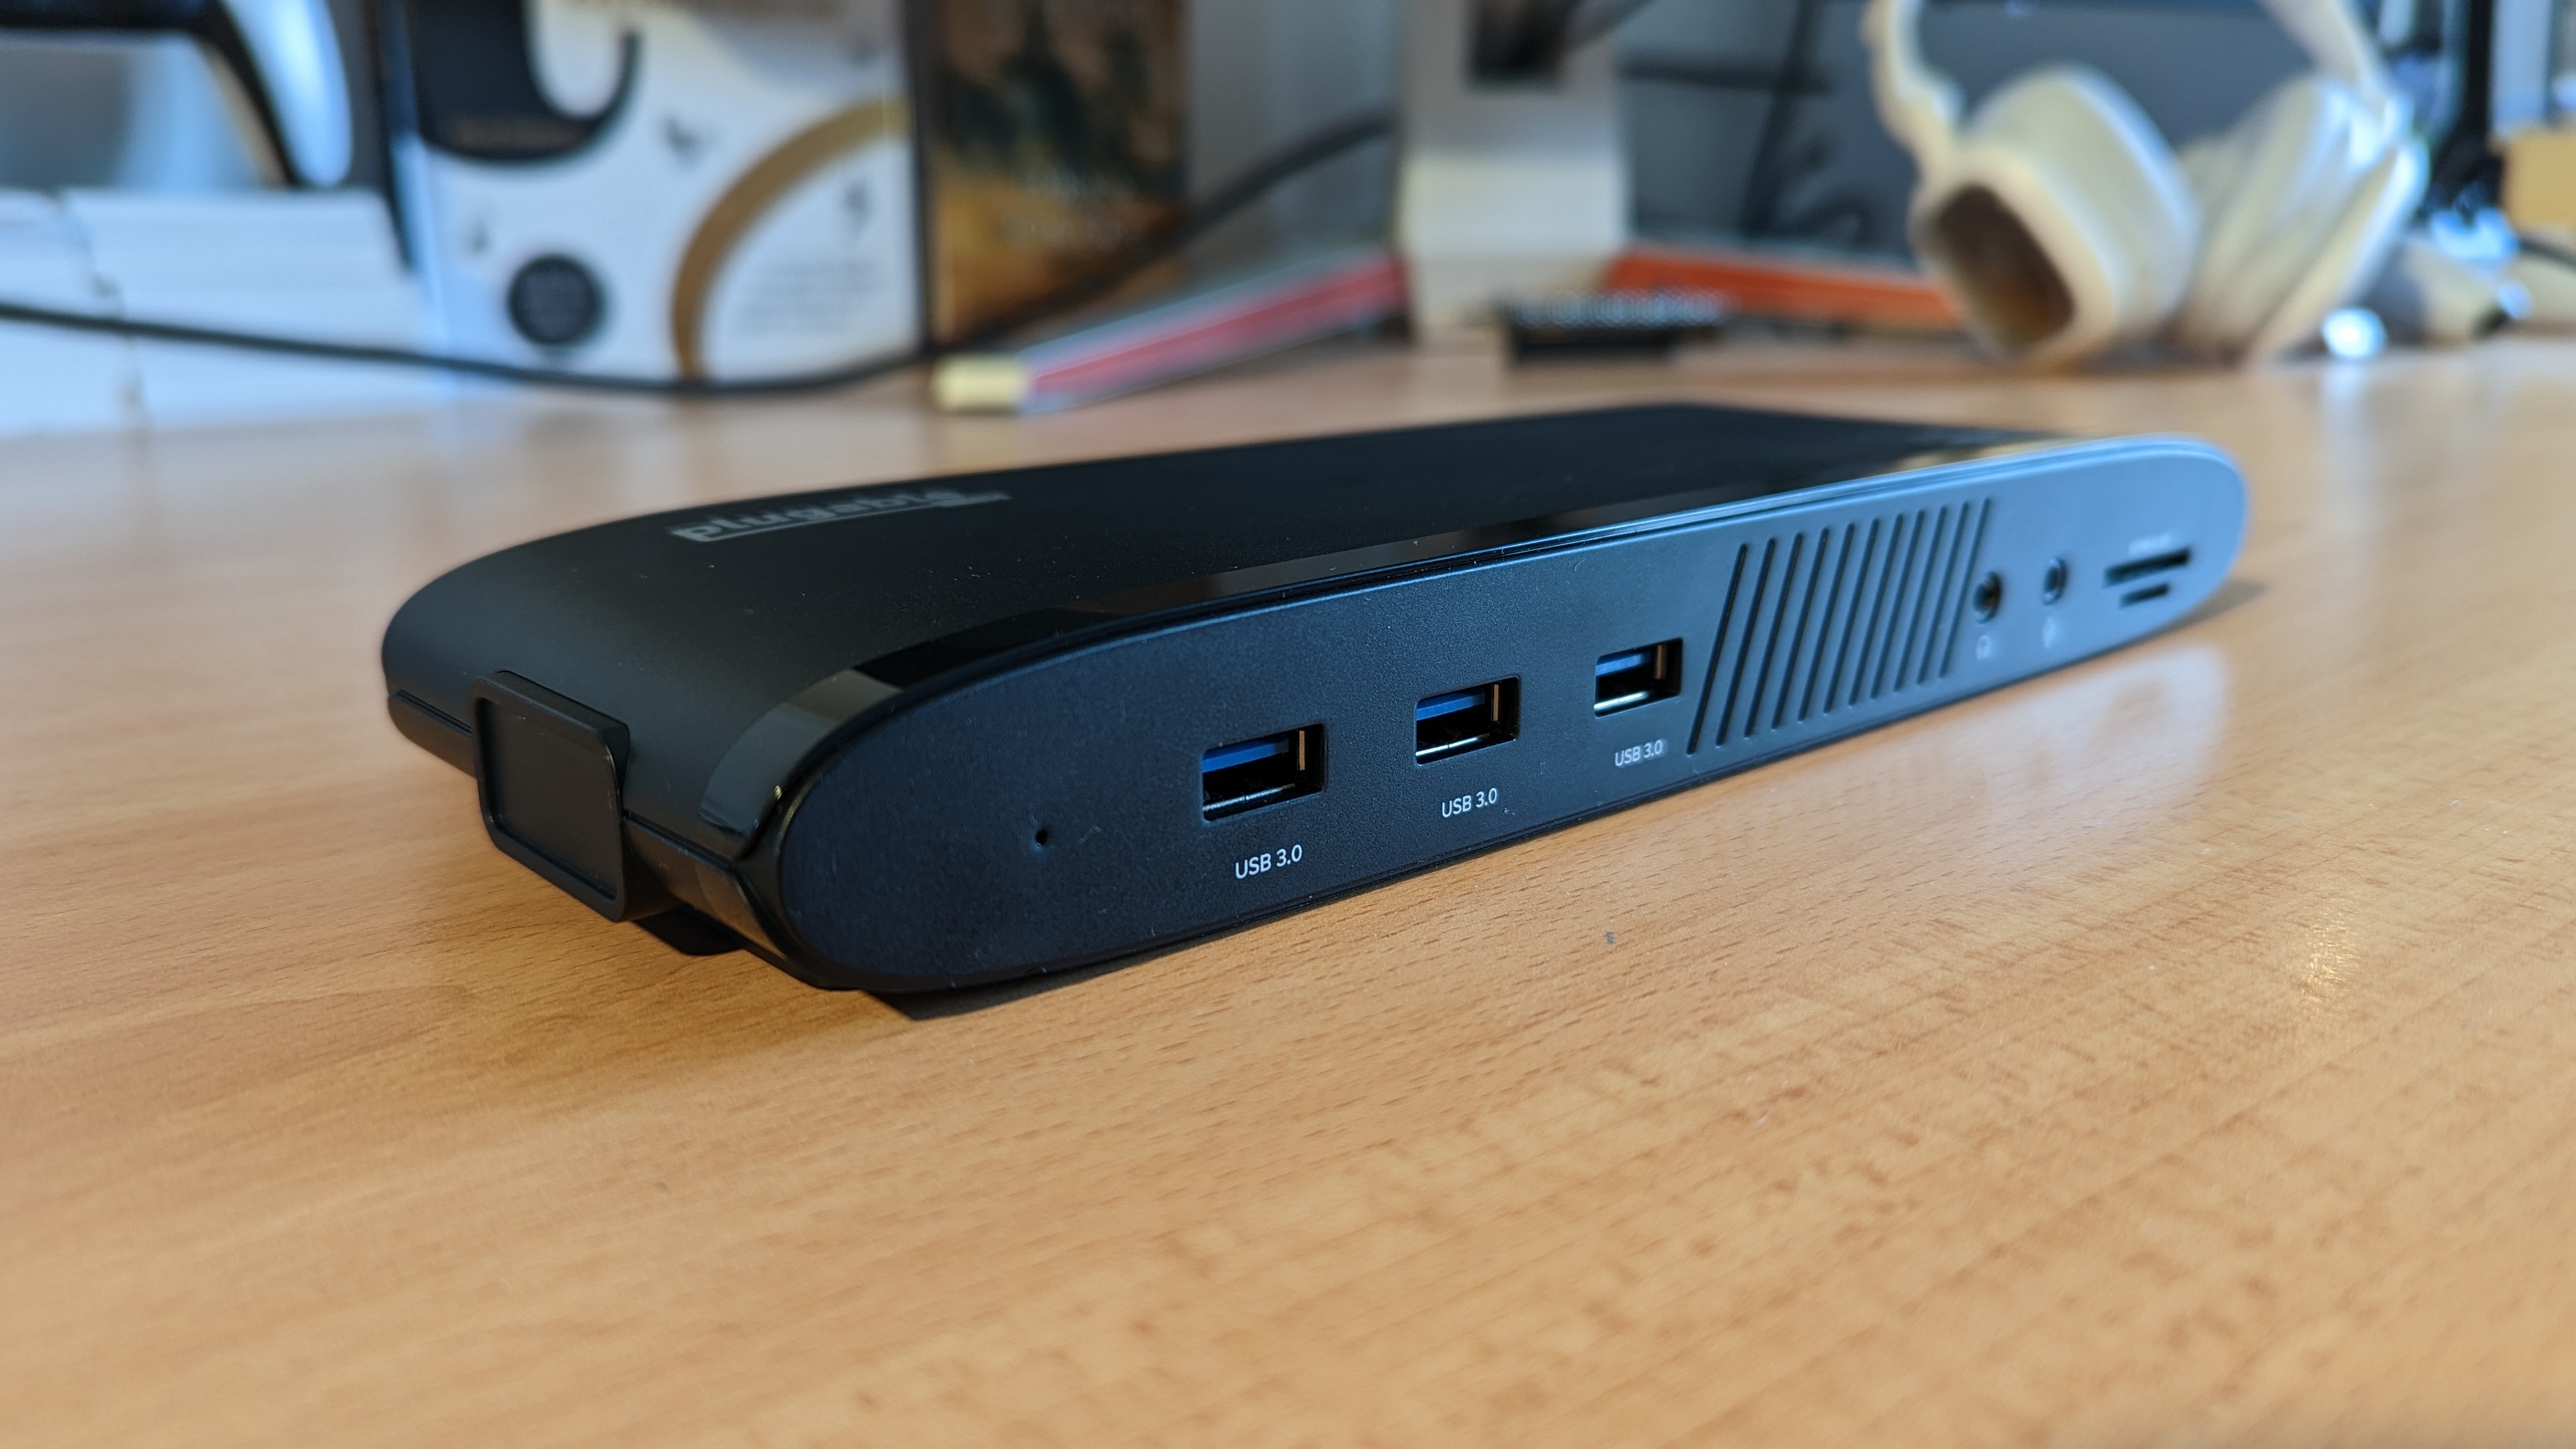 Plugable Thunderbolt 3 Dock review: Good features and price